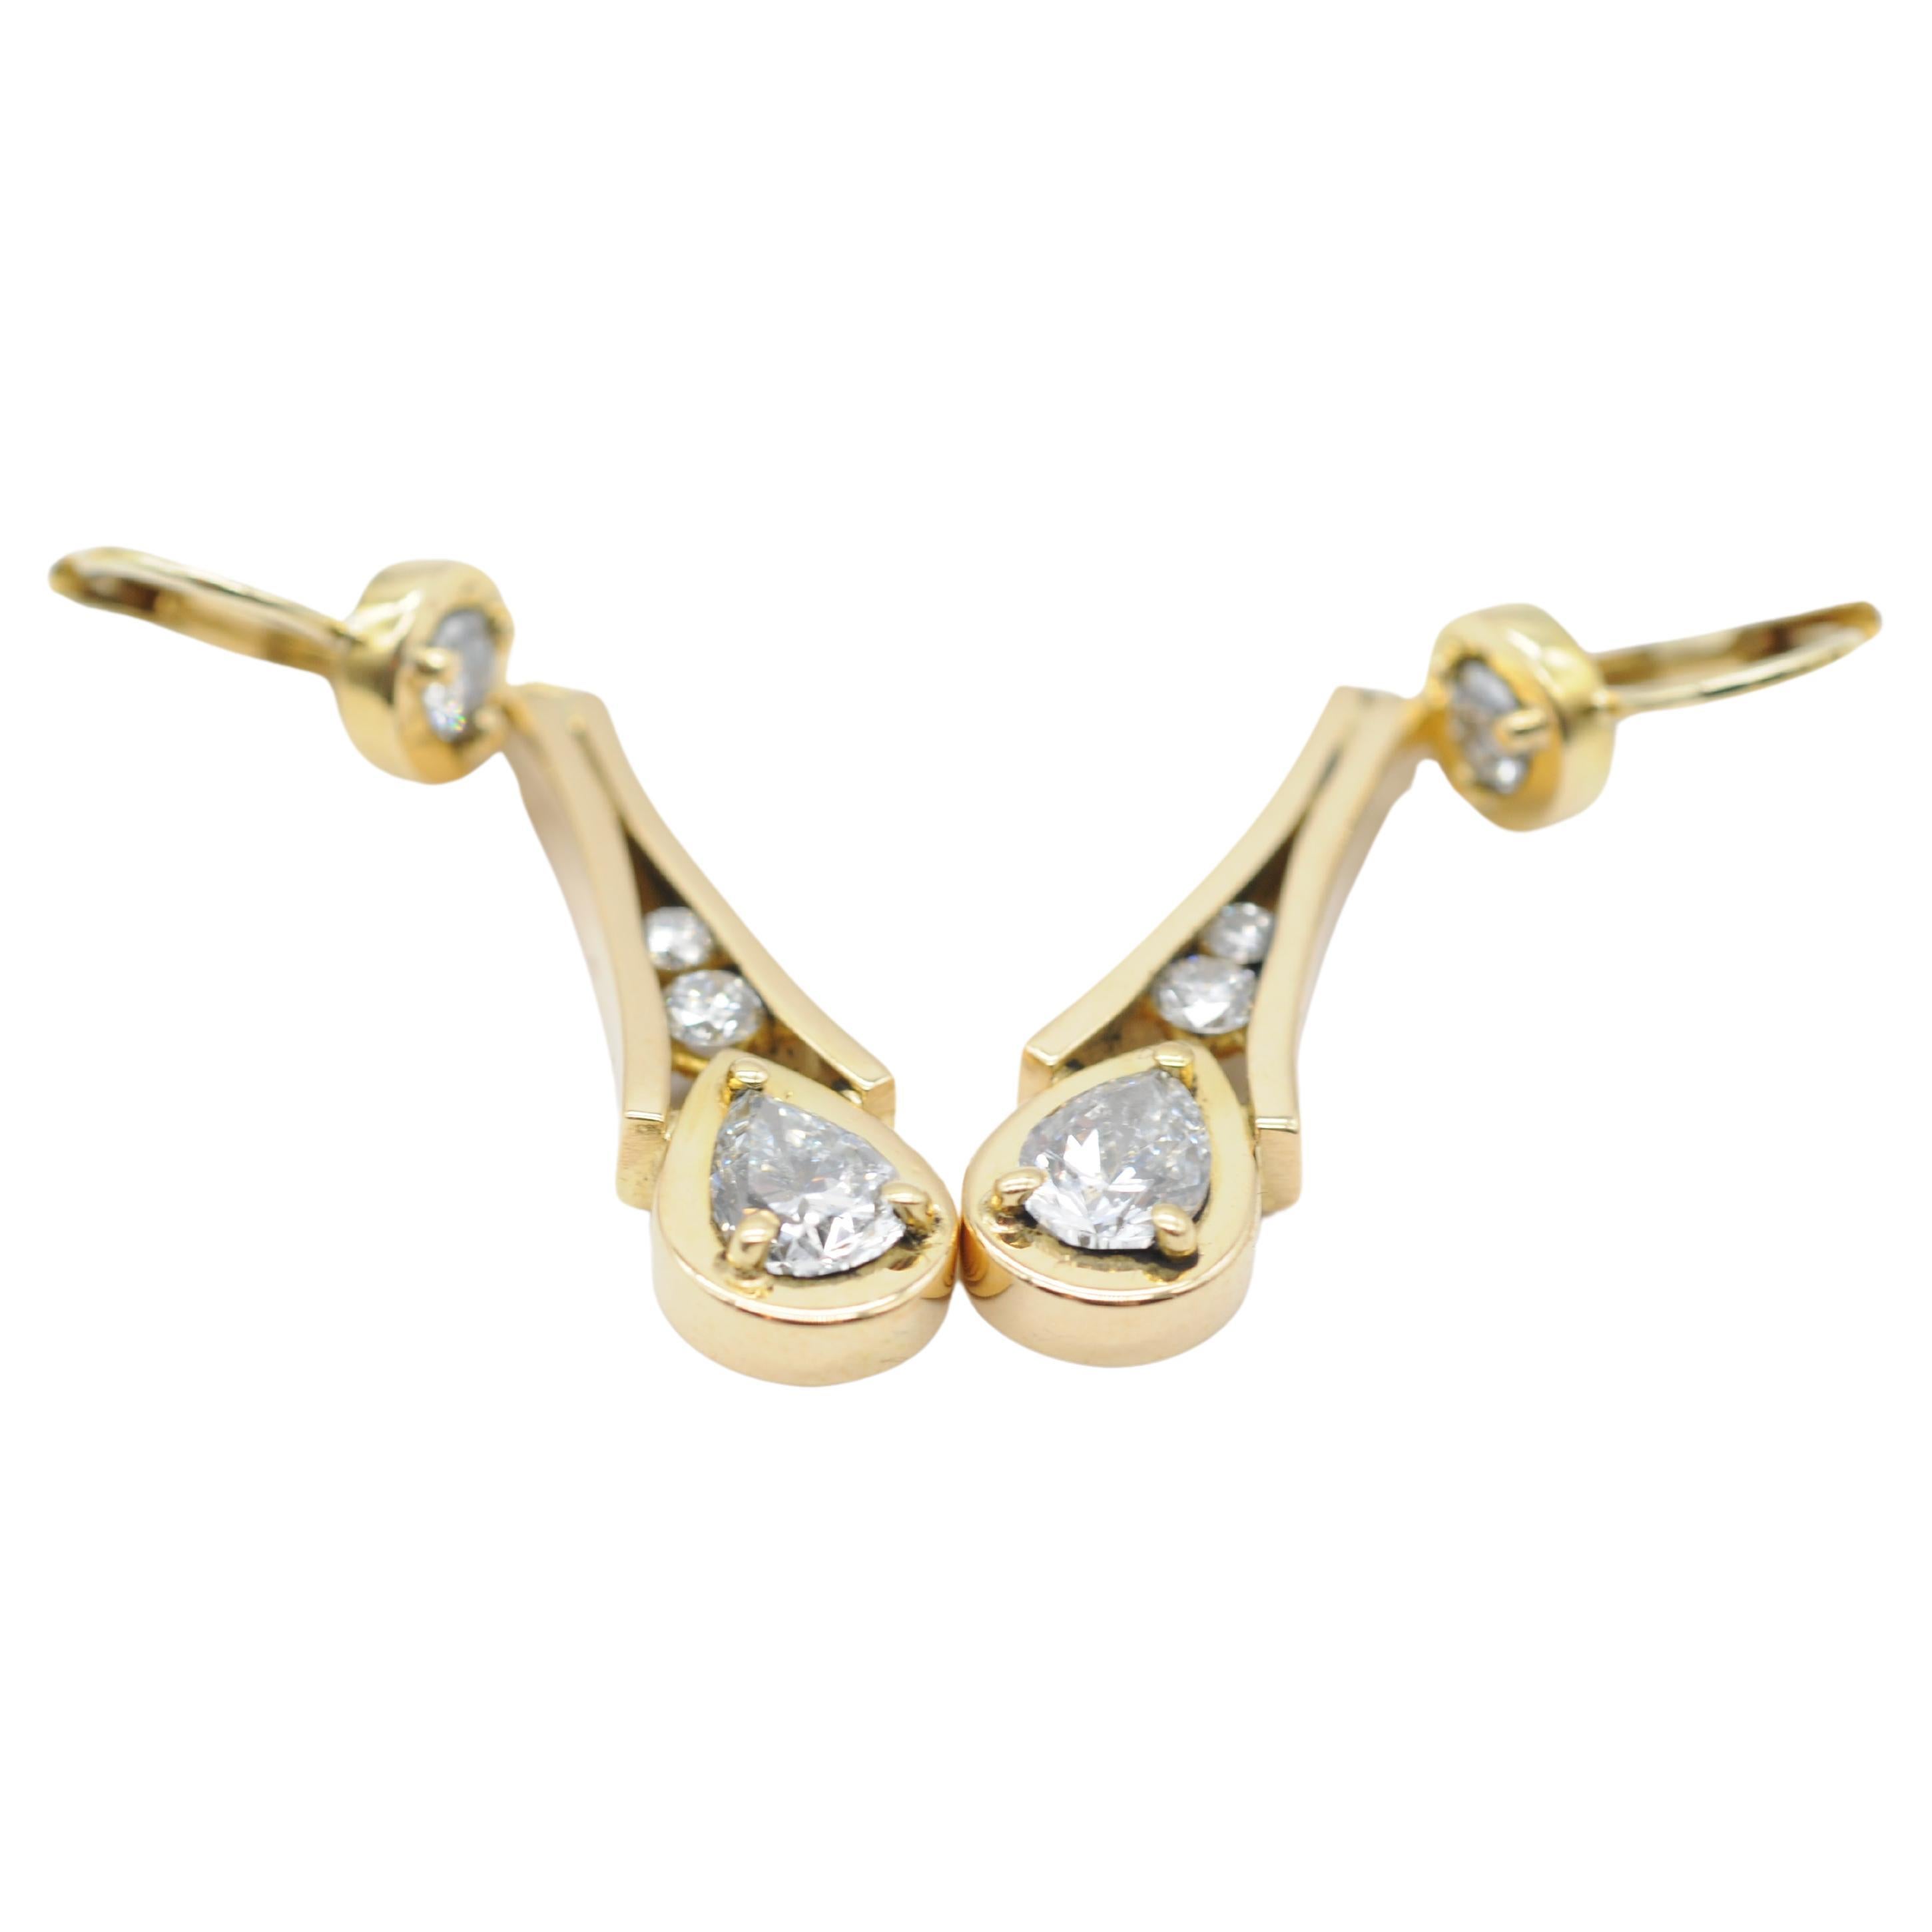 
Introducing a pair of exquisite 18k yellow gold drop earrings adorned with stunning diamonds in brilliant and pear cuts. Each earring features a captivating arrangement of diamonds, with three brilliant-cut diamonds adorning each piece, ranging in